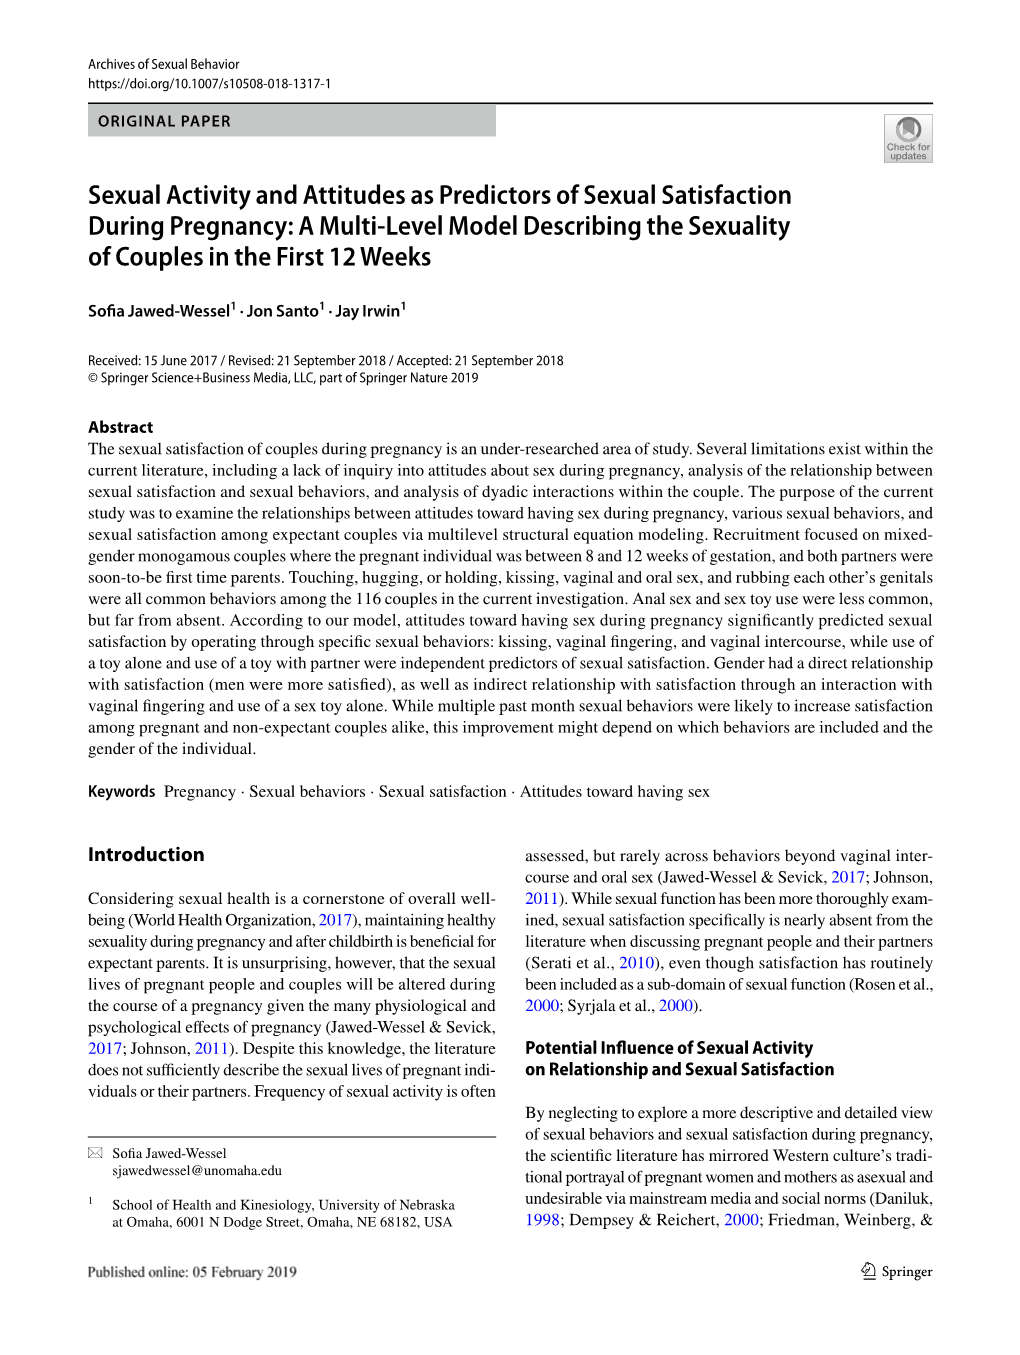 Sexual Activity and Attitudes As Predictors of Sexual Satisfaction During Pregnancy: a Multi‑Level Model Describing the Sexuality of Couples in the First 12 Weeks